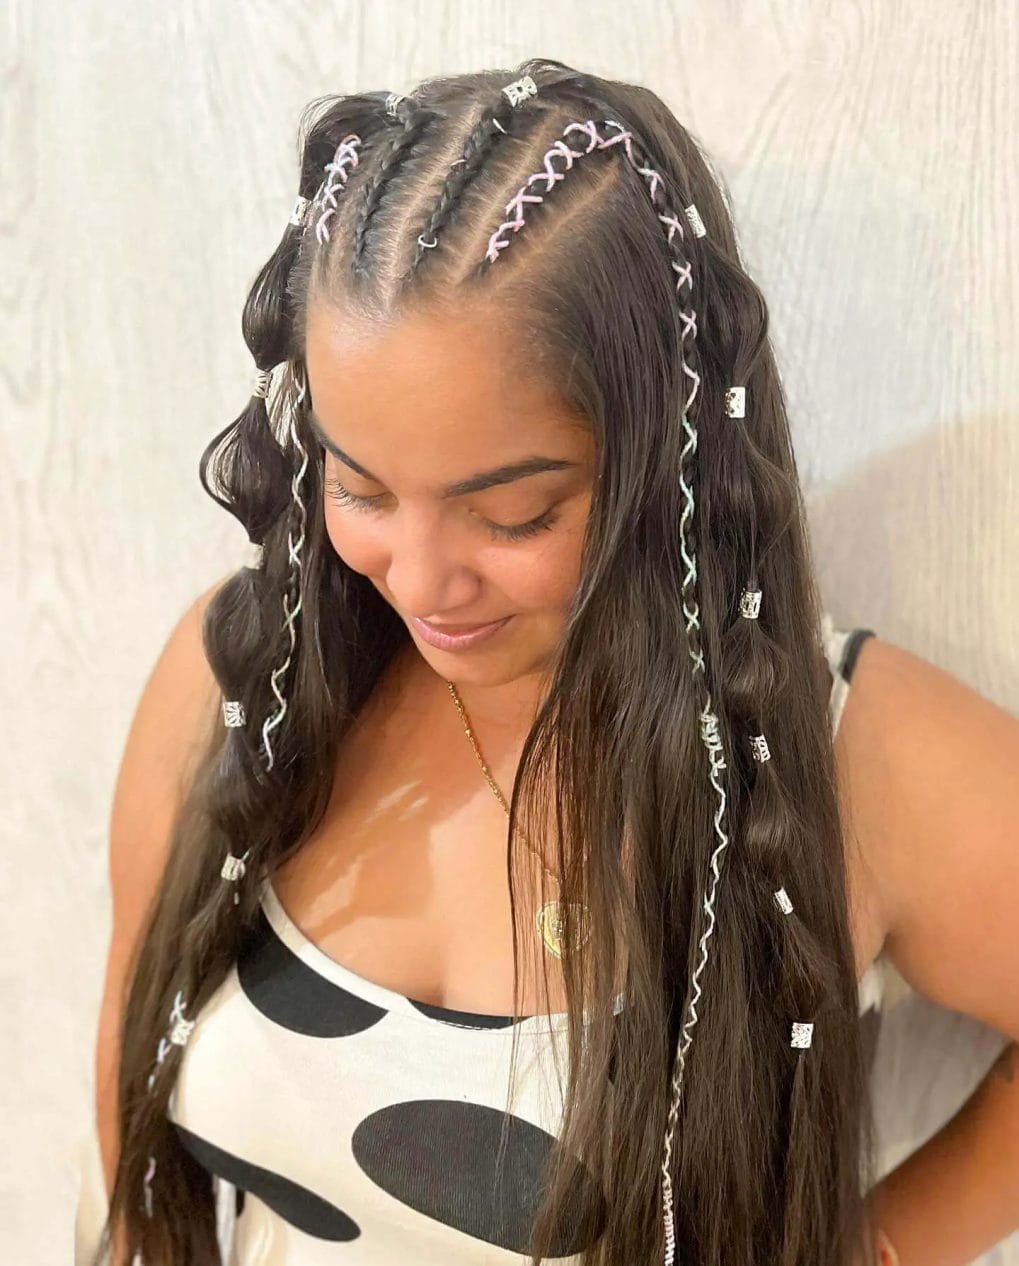 Combination of loose waves and braids with sparkling silver beads.